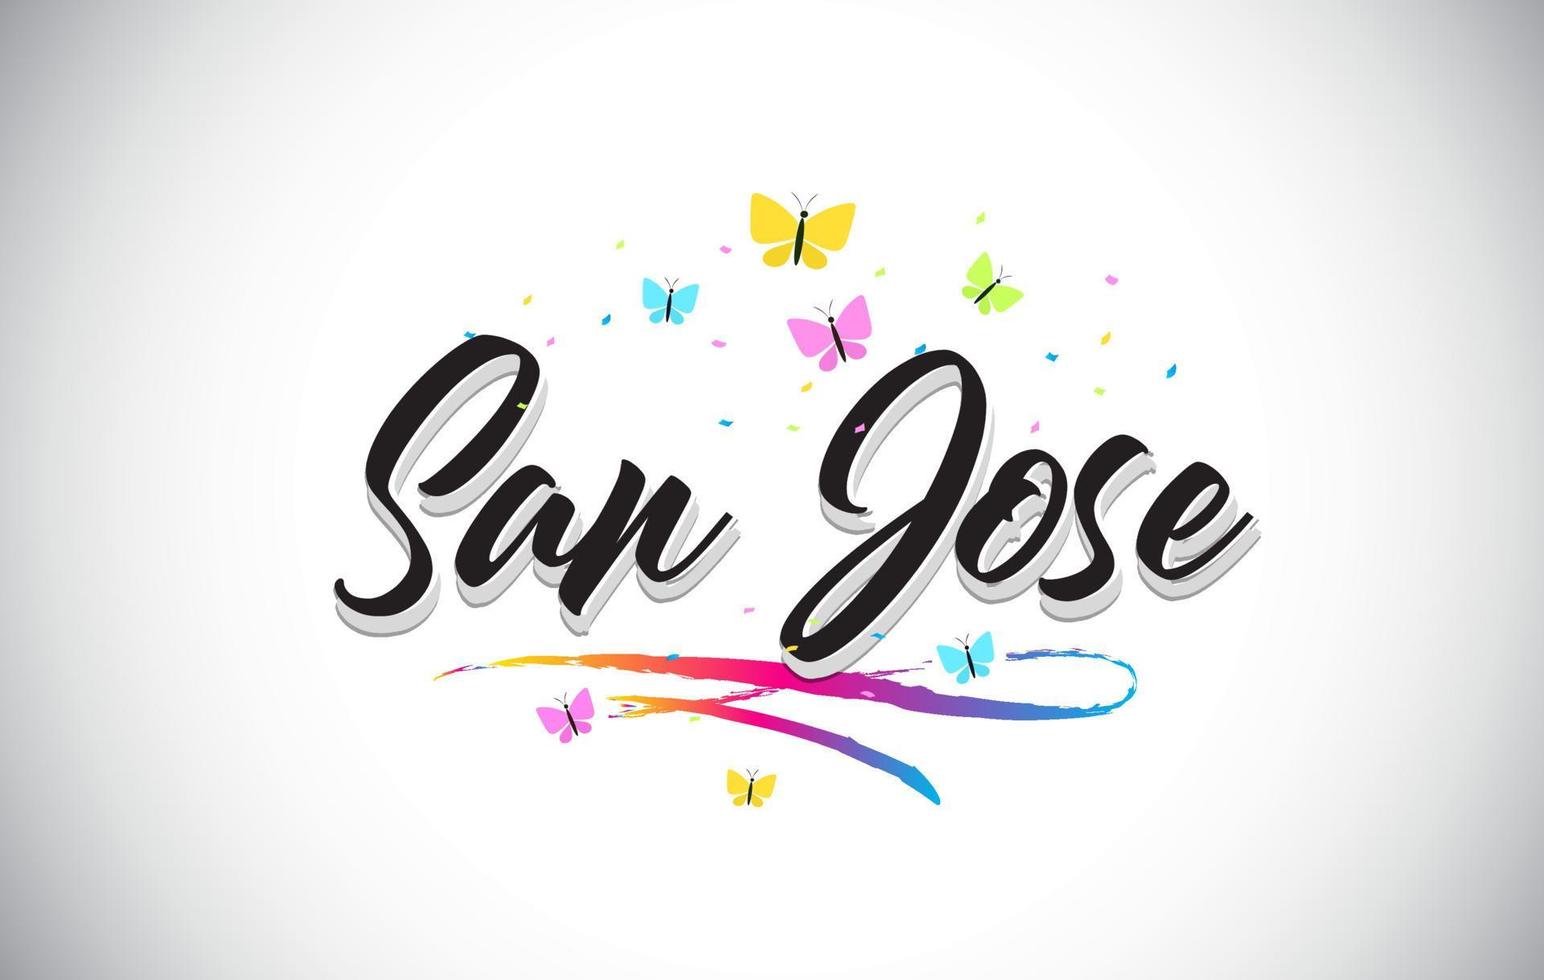 San Jose Handwritten Vector Word Text with Butterflies and Colorful Swoosh.